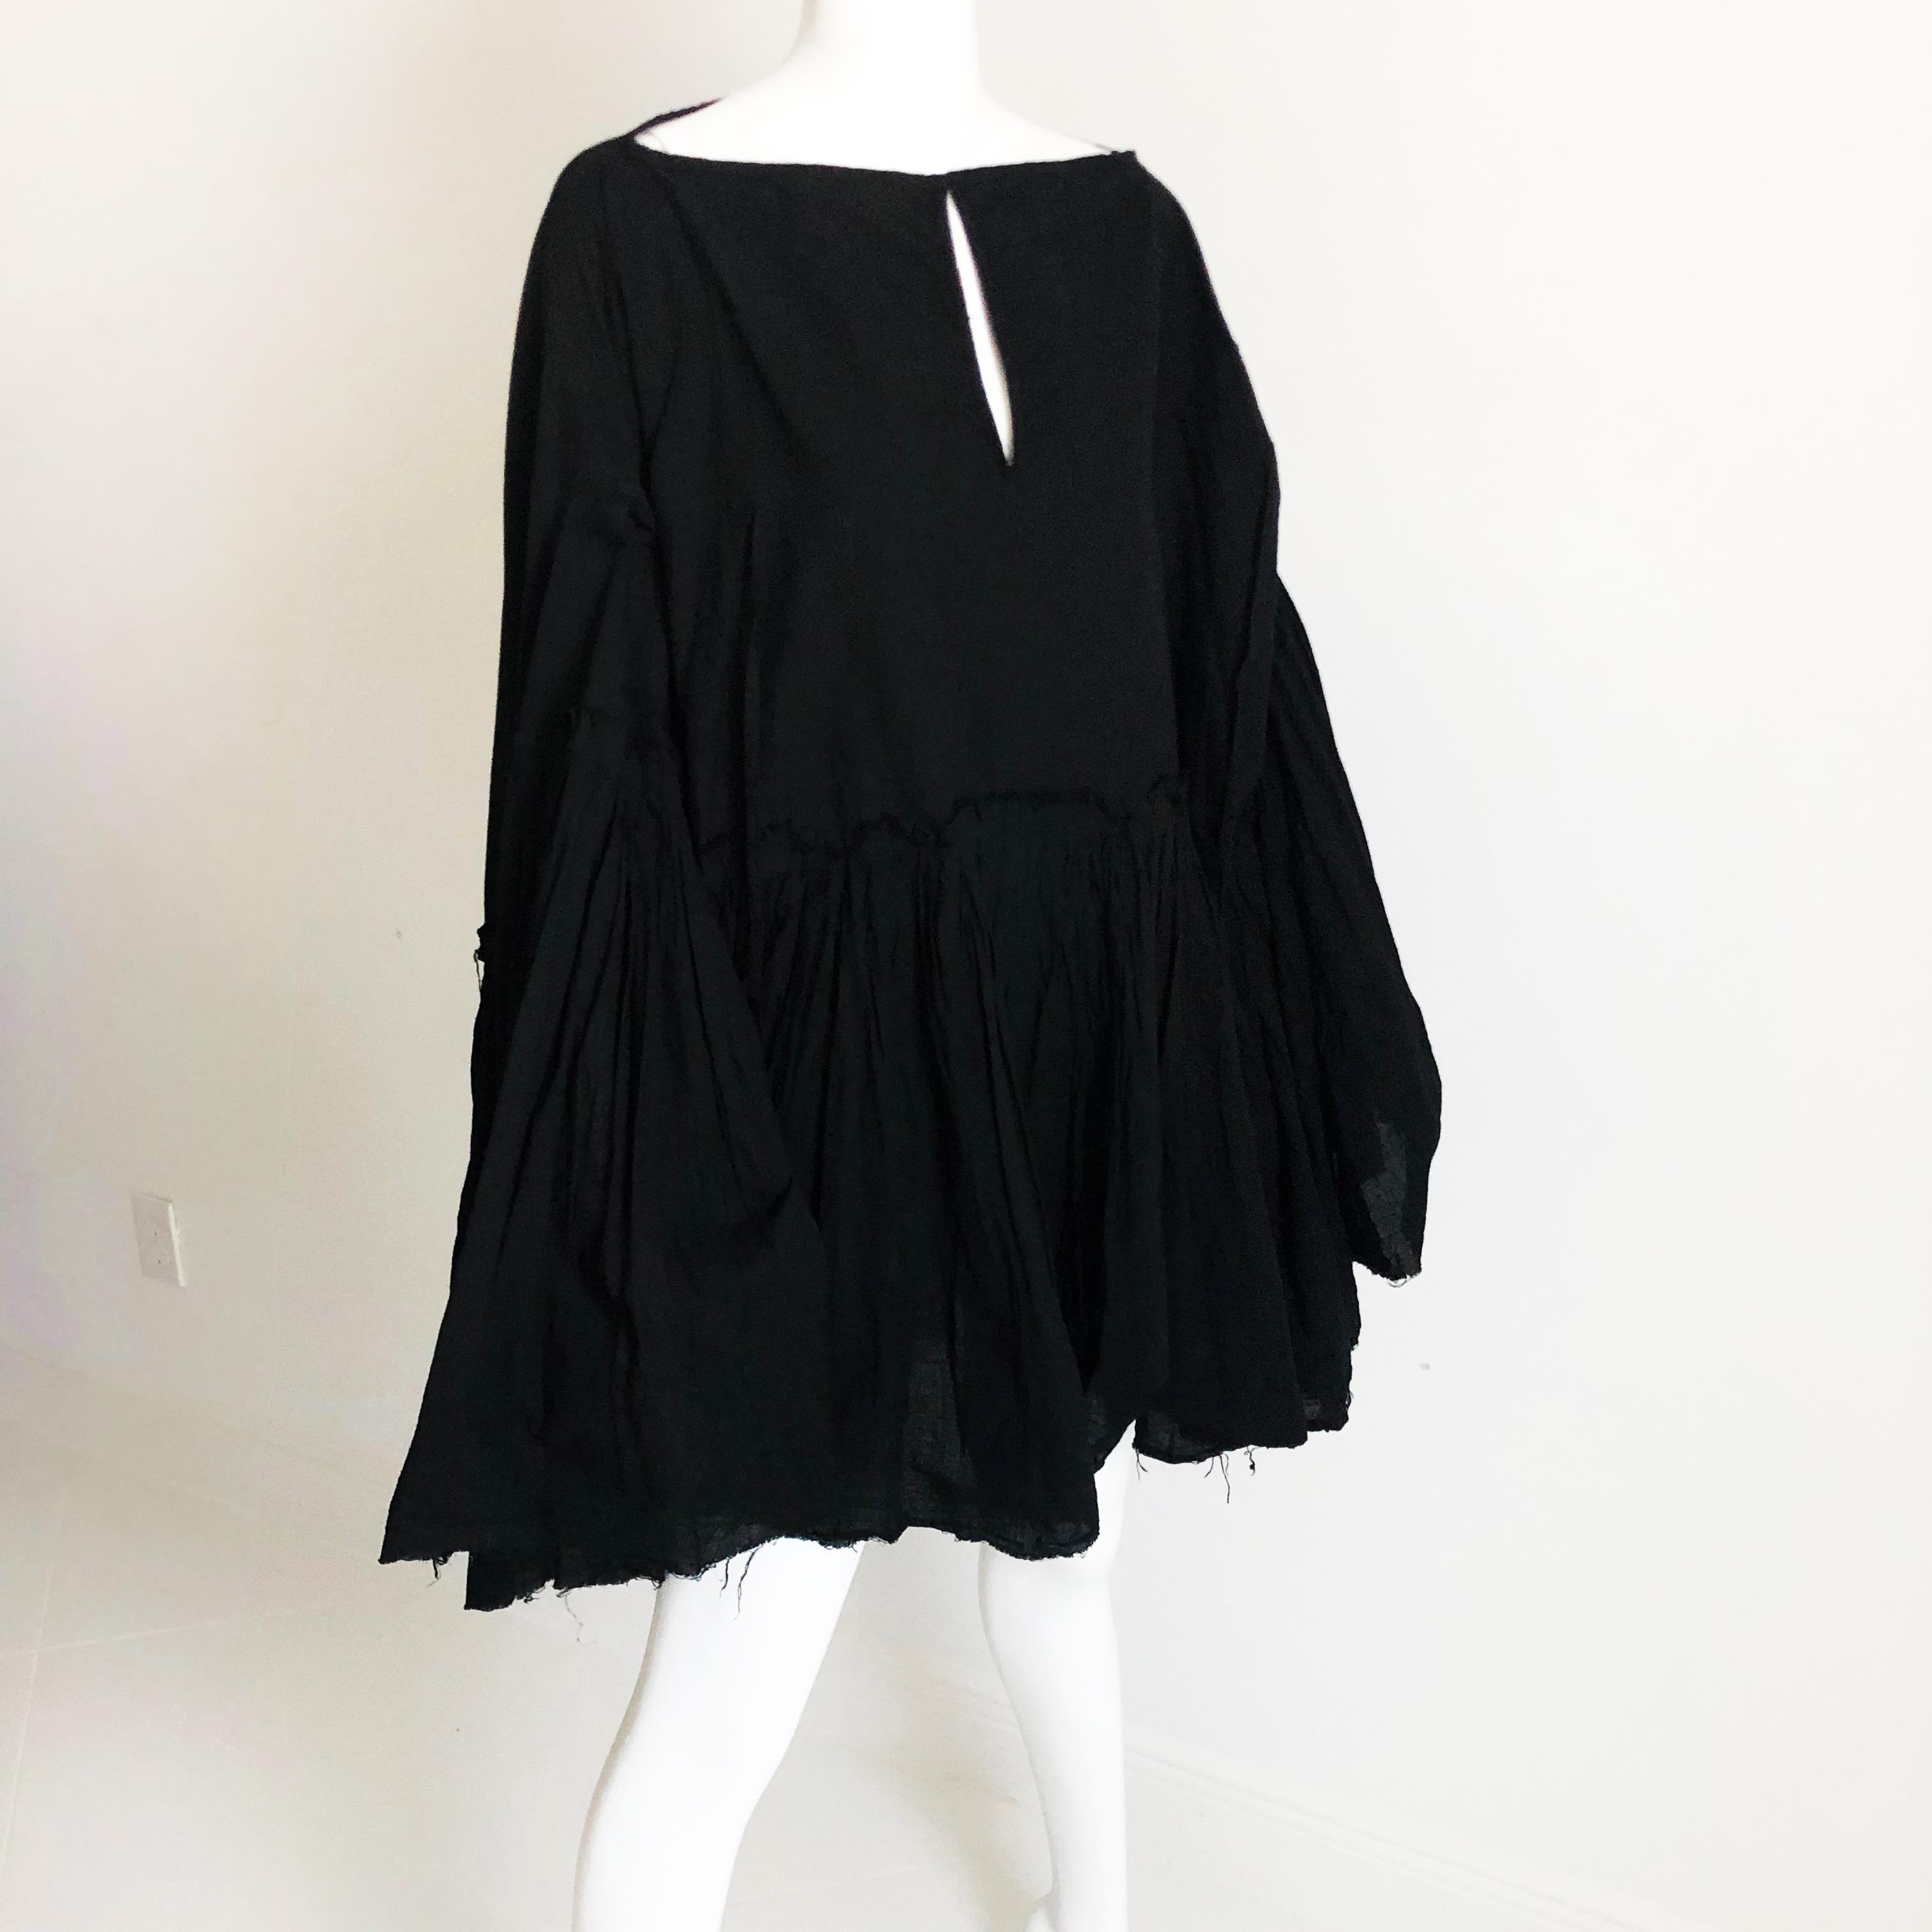 Junya Watanabe Black Ruffle Poncho Comme des Garçons M   In Good Condition For Sale In Port Saint Lucie, FL